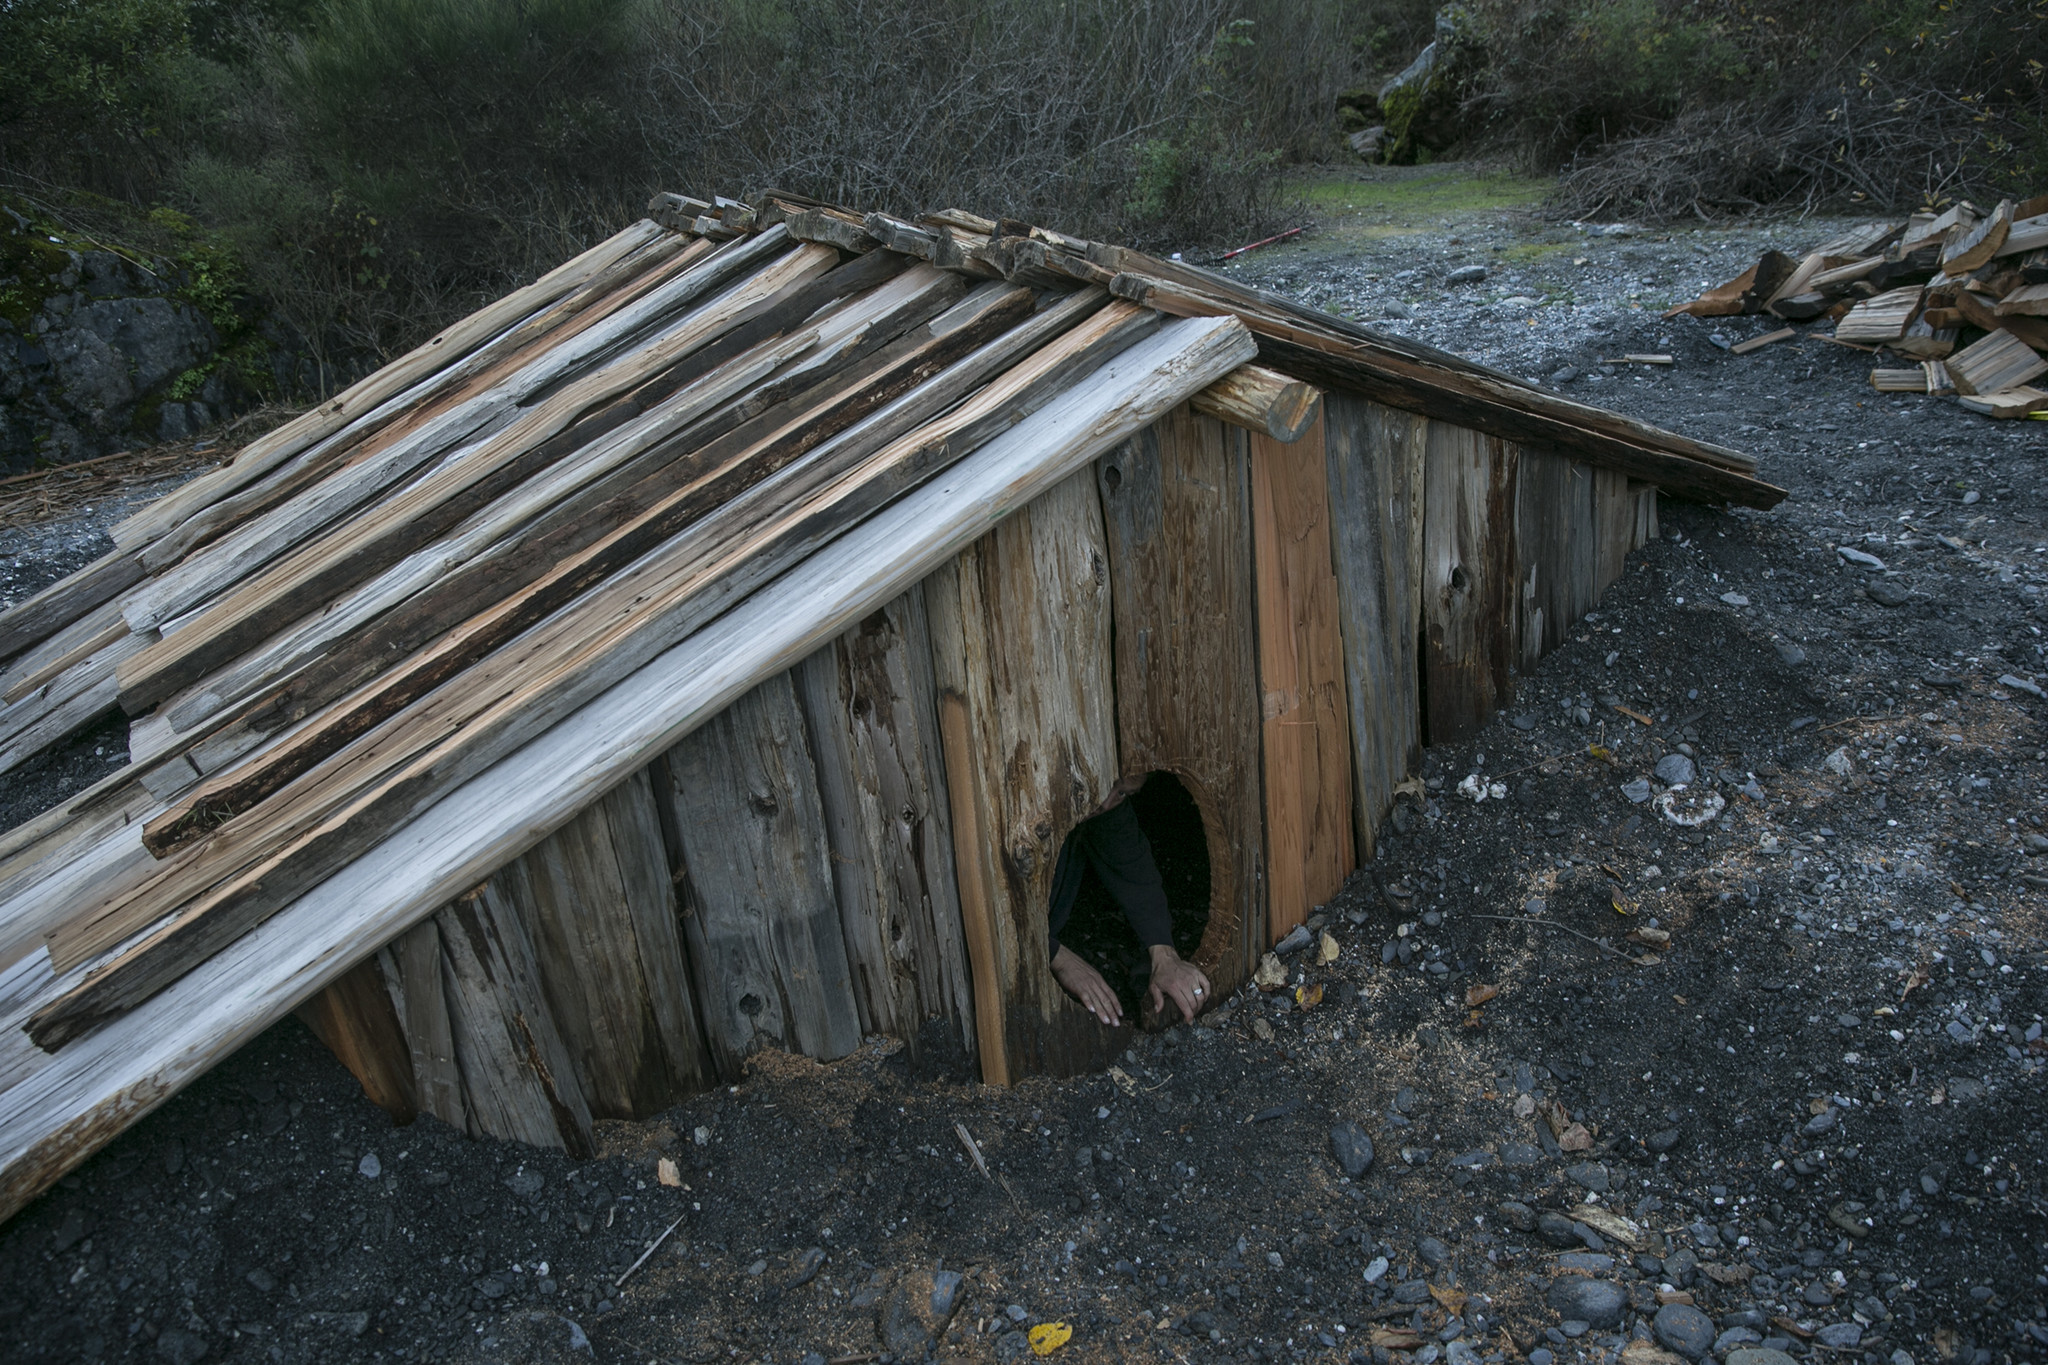 The Yurok people traditionally lived in redwood plank villages along the river. The sweat house, lik